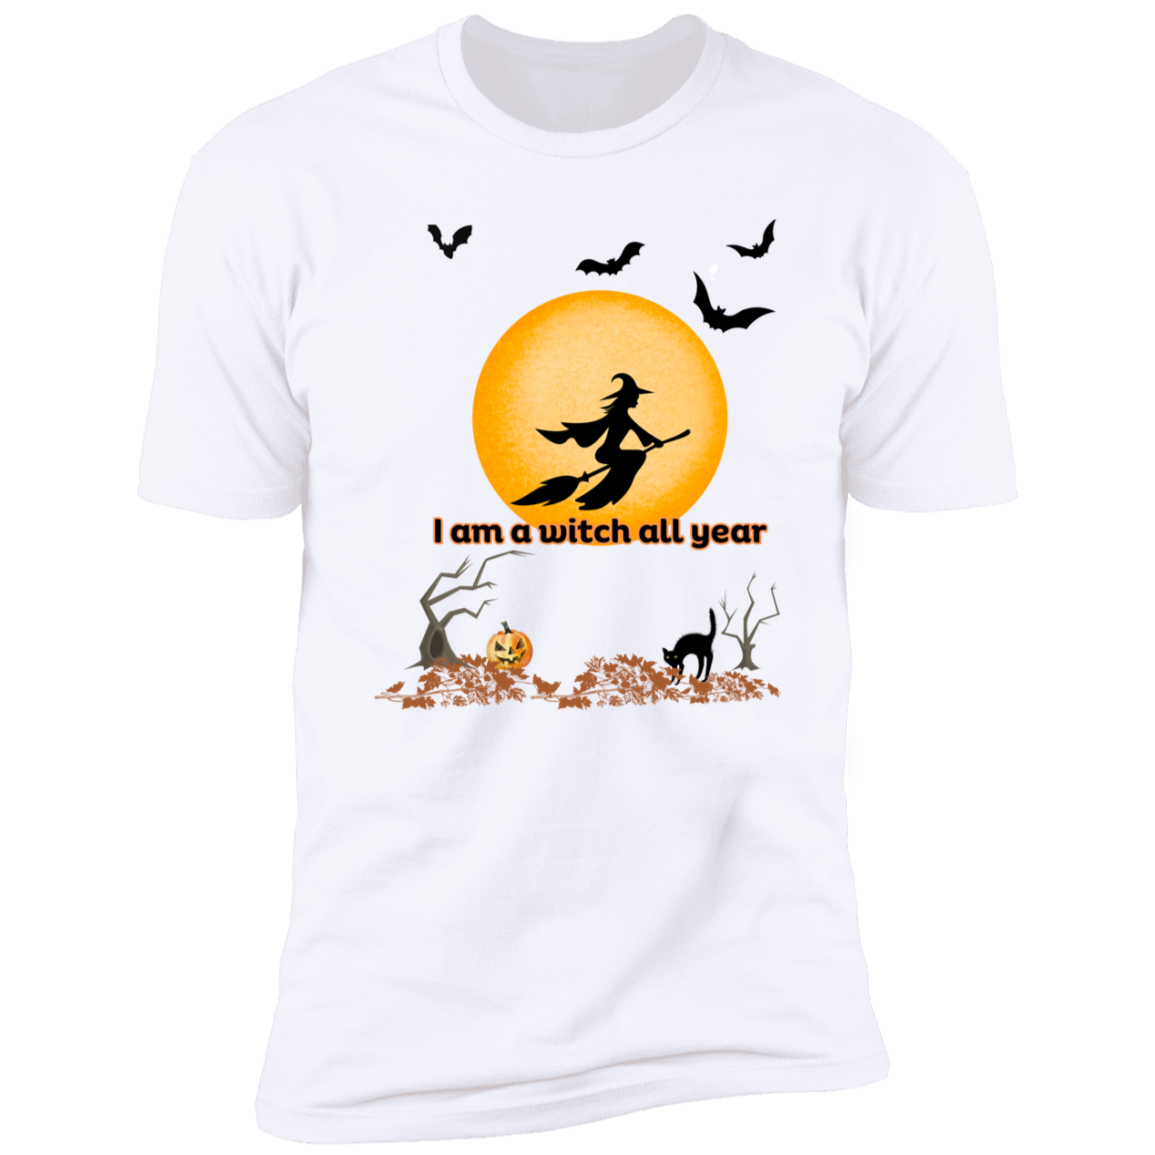 Get trendy with I am a witch all year Premium Short Sleeve Tee - T-Shirts available at Good Gift Company. Grab yours for $18 today!